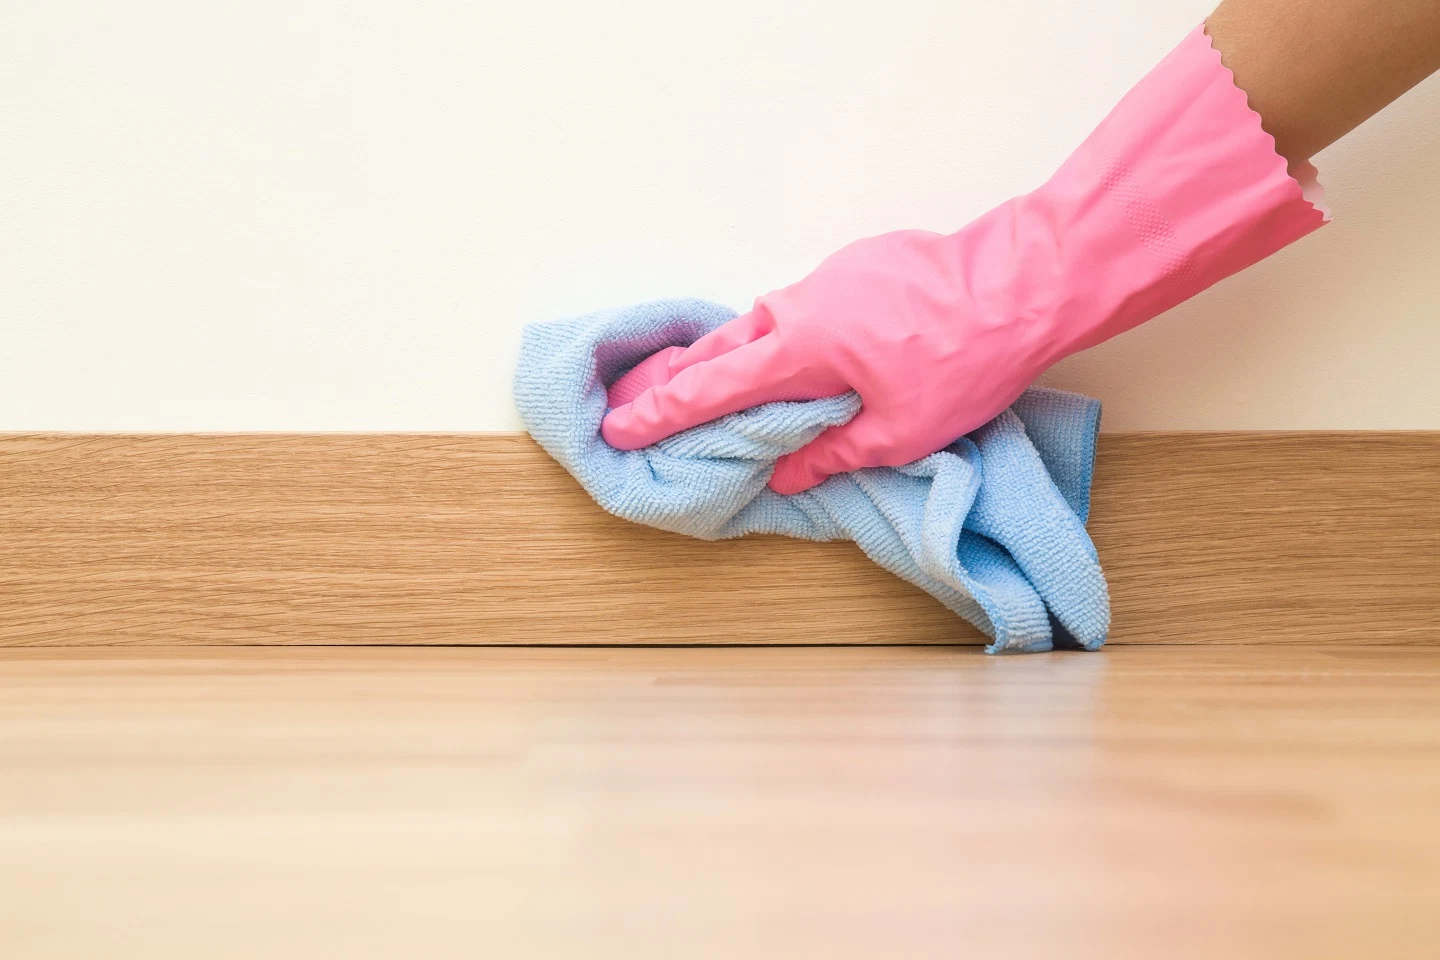 How to Clean floor baseboards?